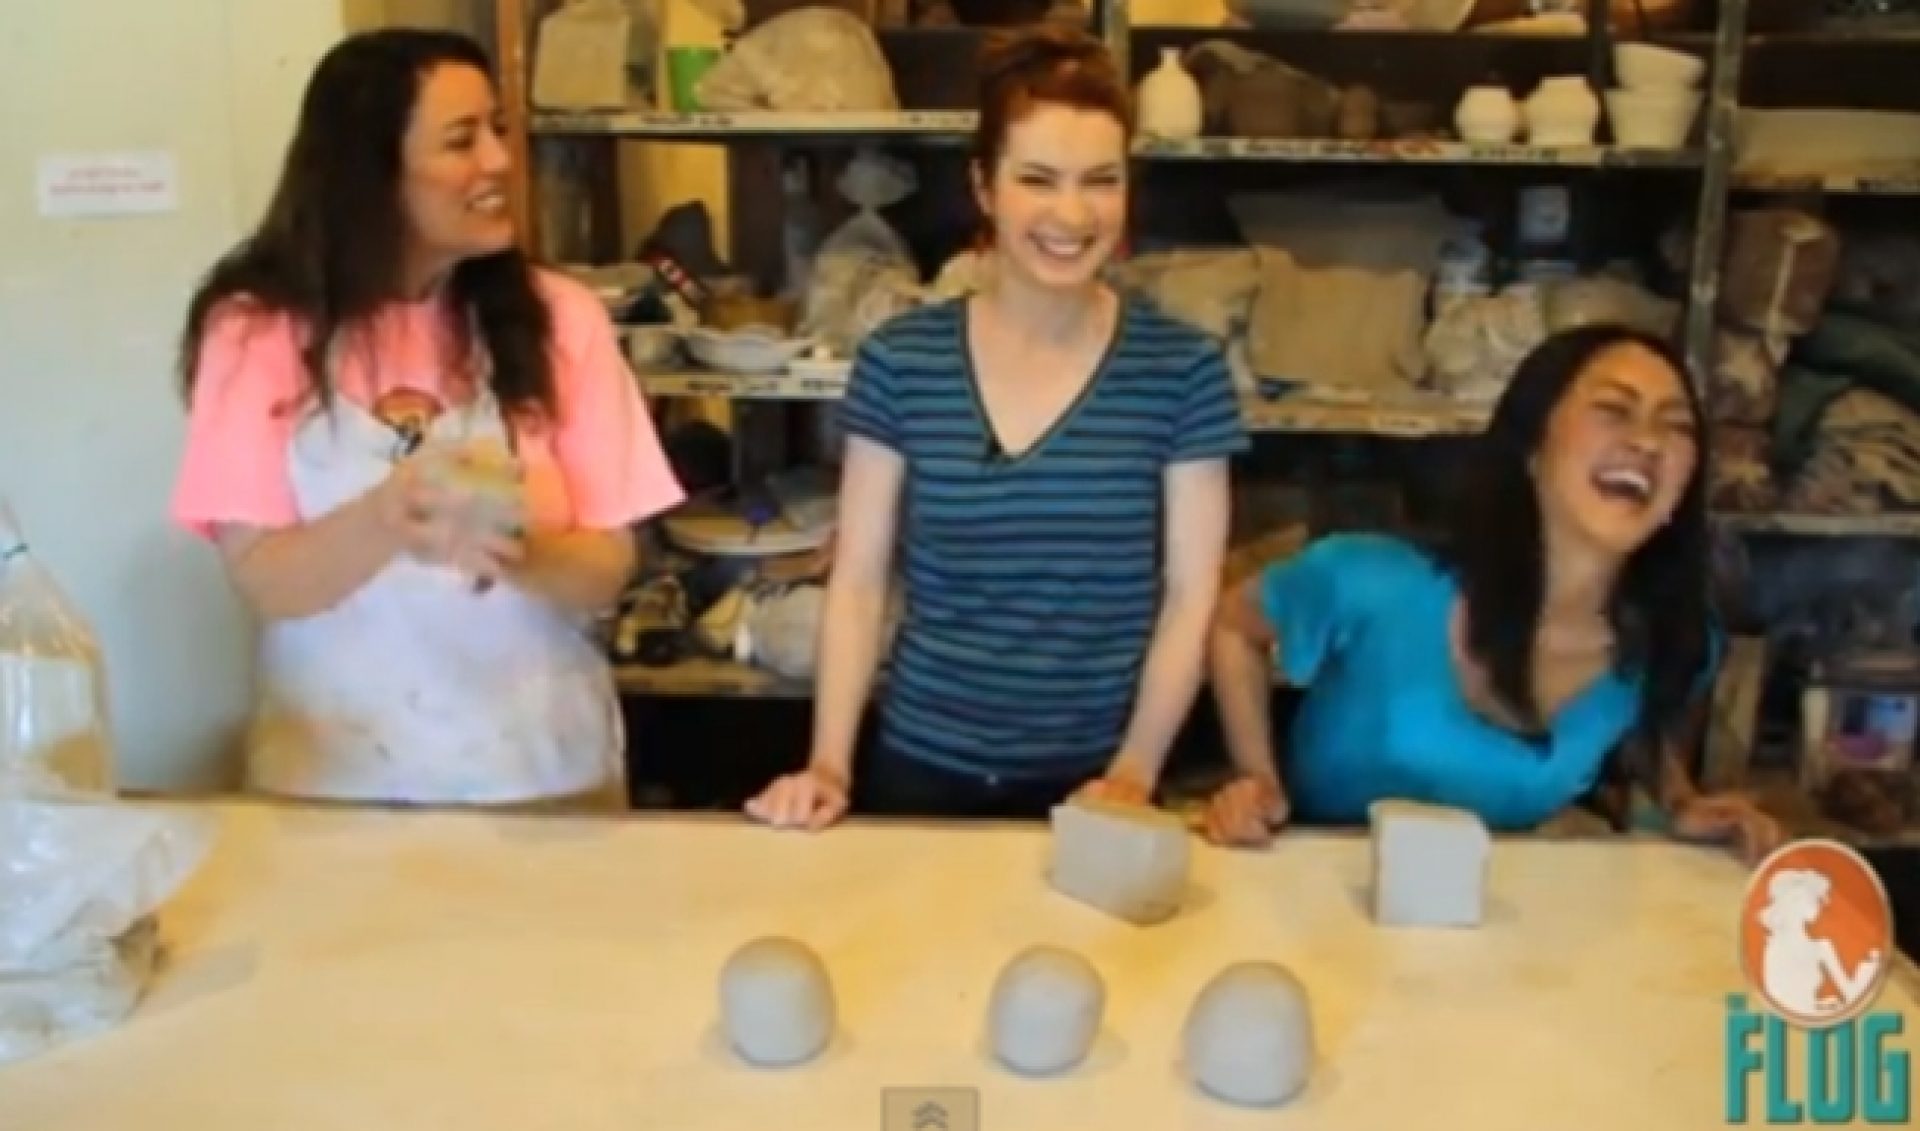 You Can Buy Felicia Day’s Pottery, So Get On It